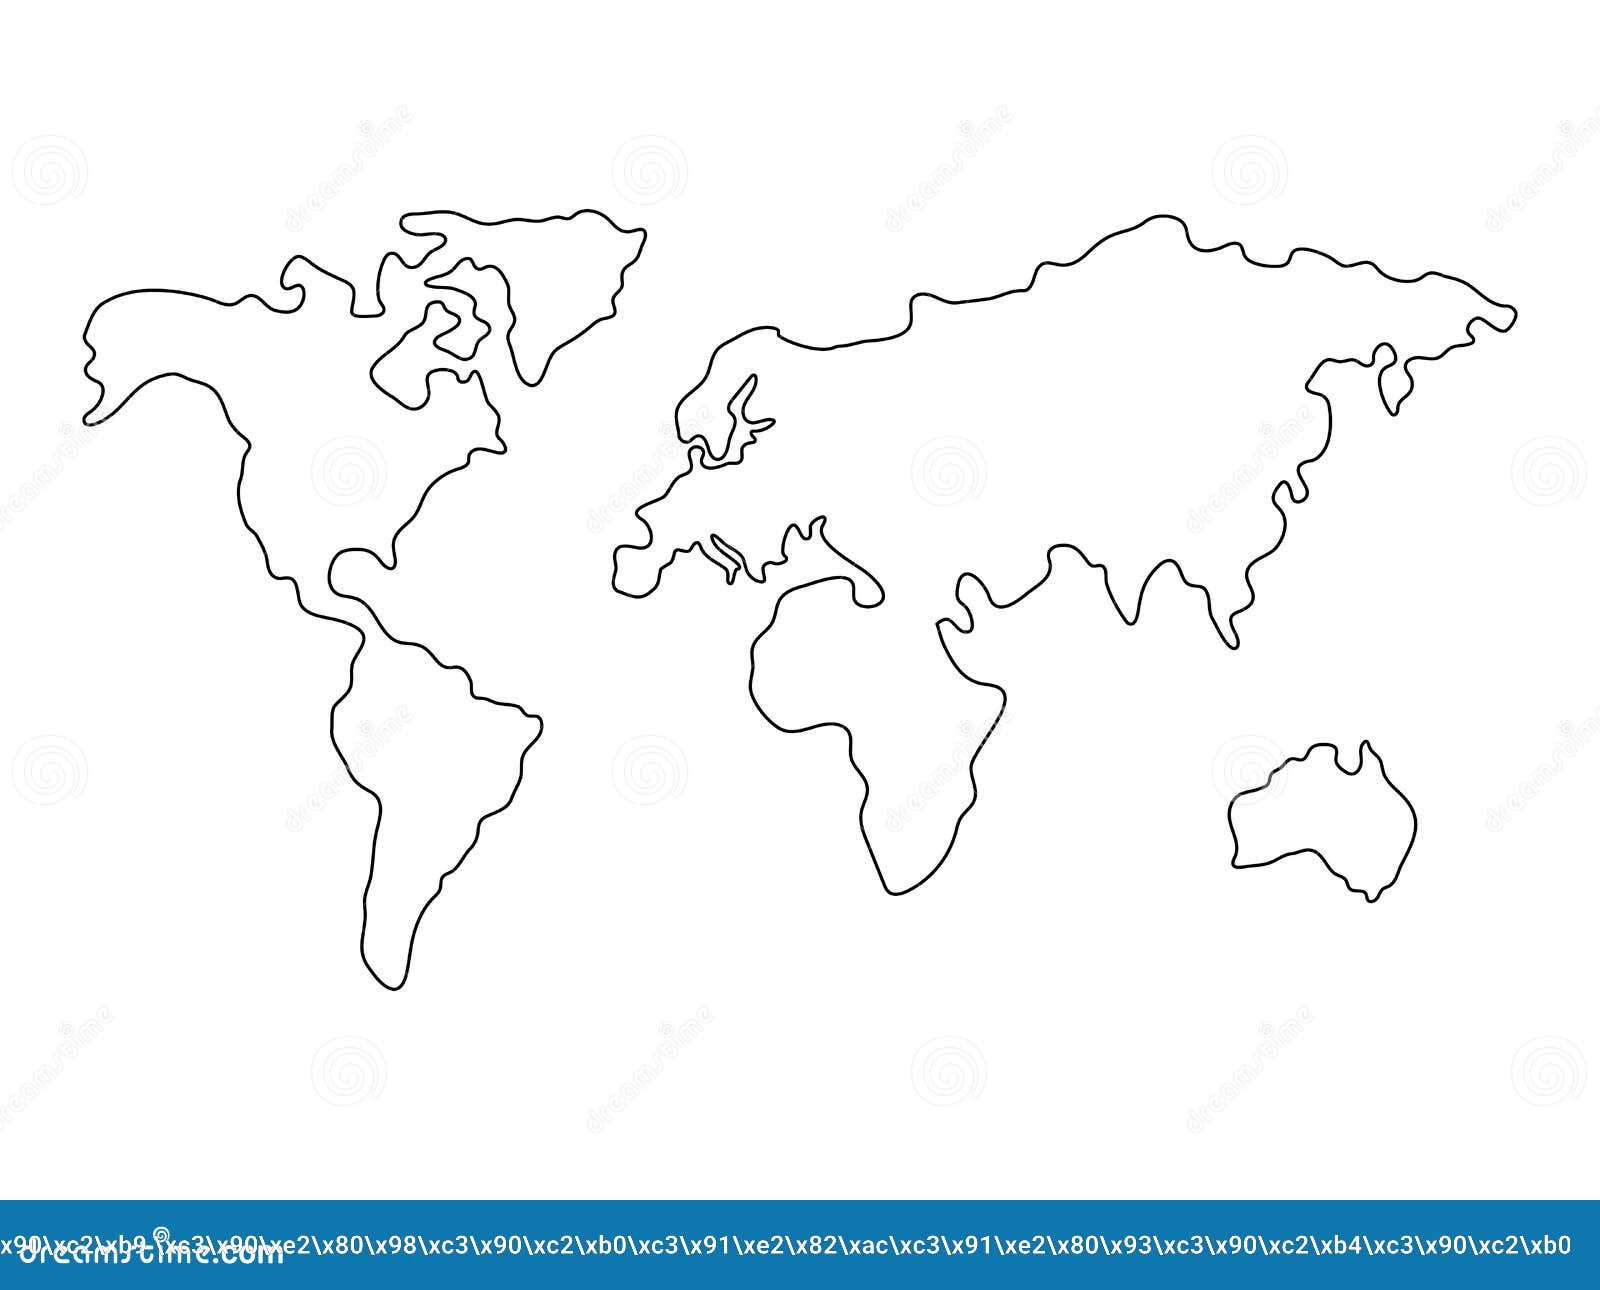 Earth line continents stock illustration. Illustration of line - 257296644